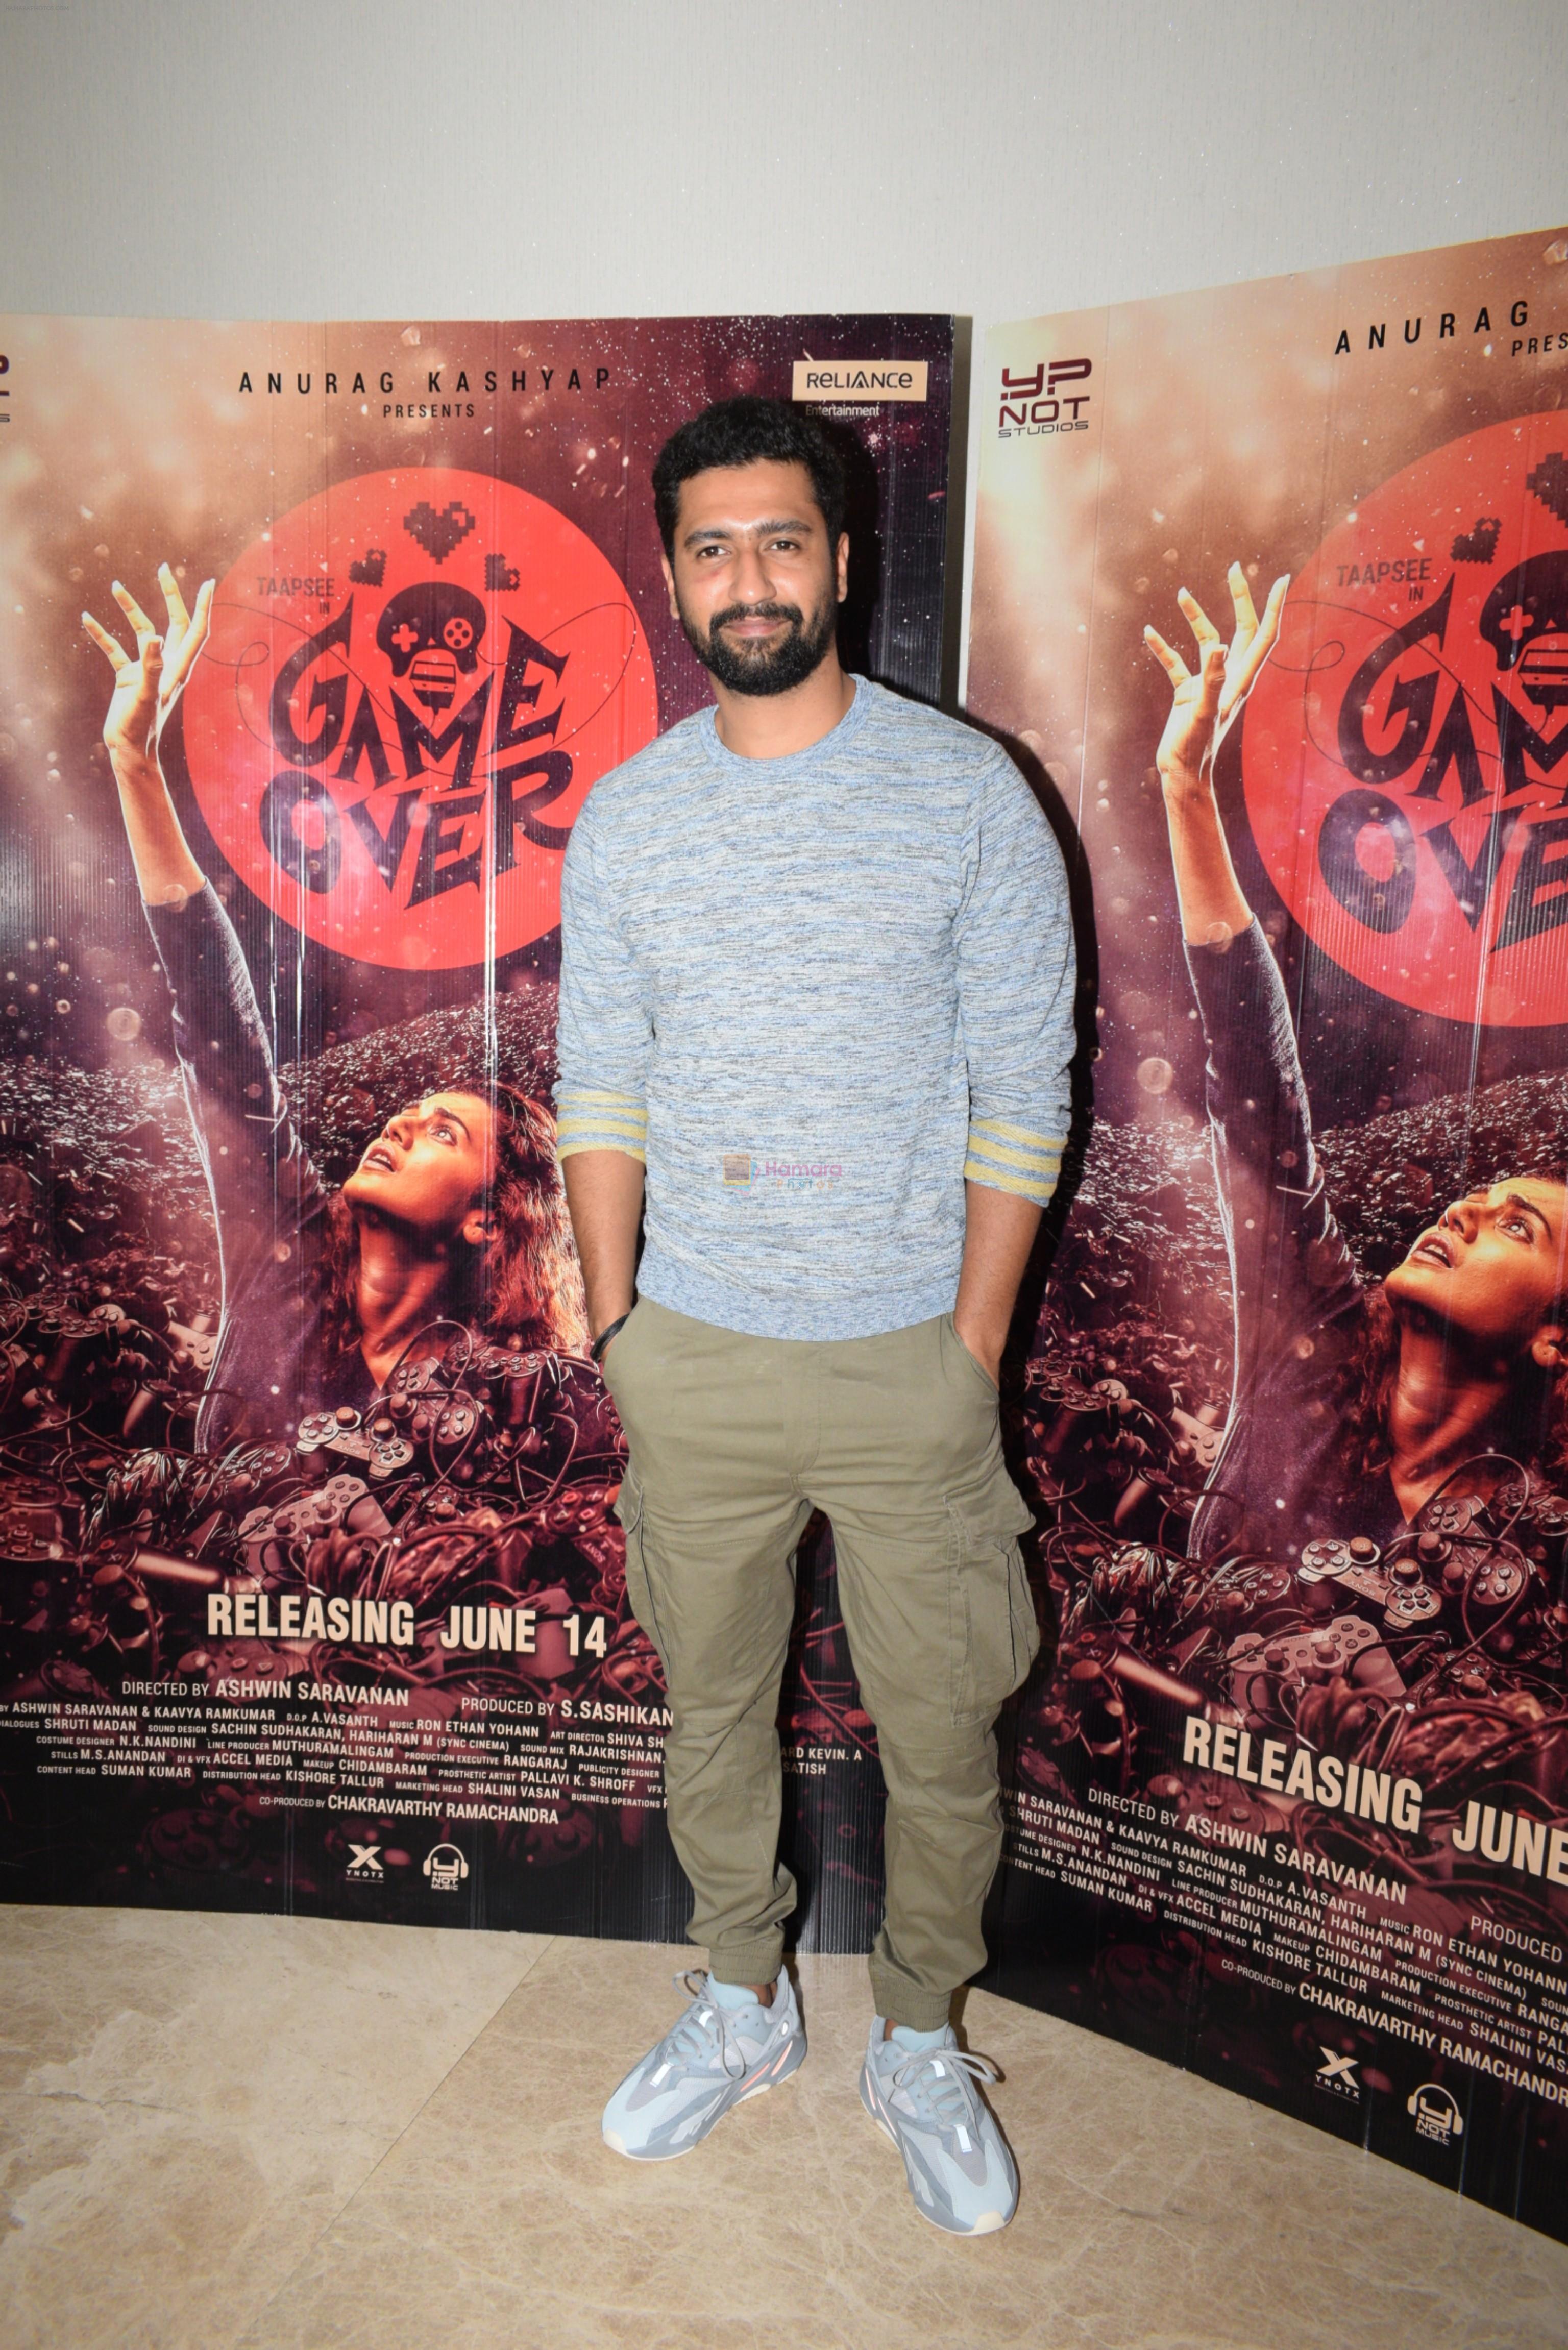 Vicky Kaushal at the Screening of film Game Over in the View, Andheri on 11th June 2019